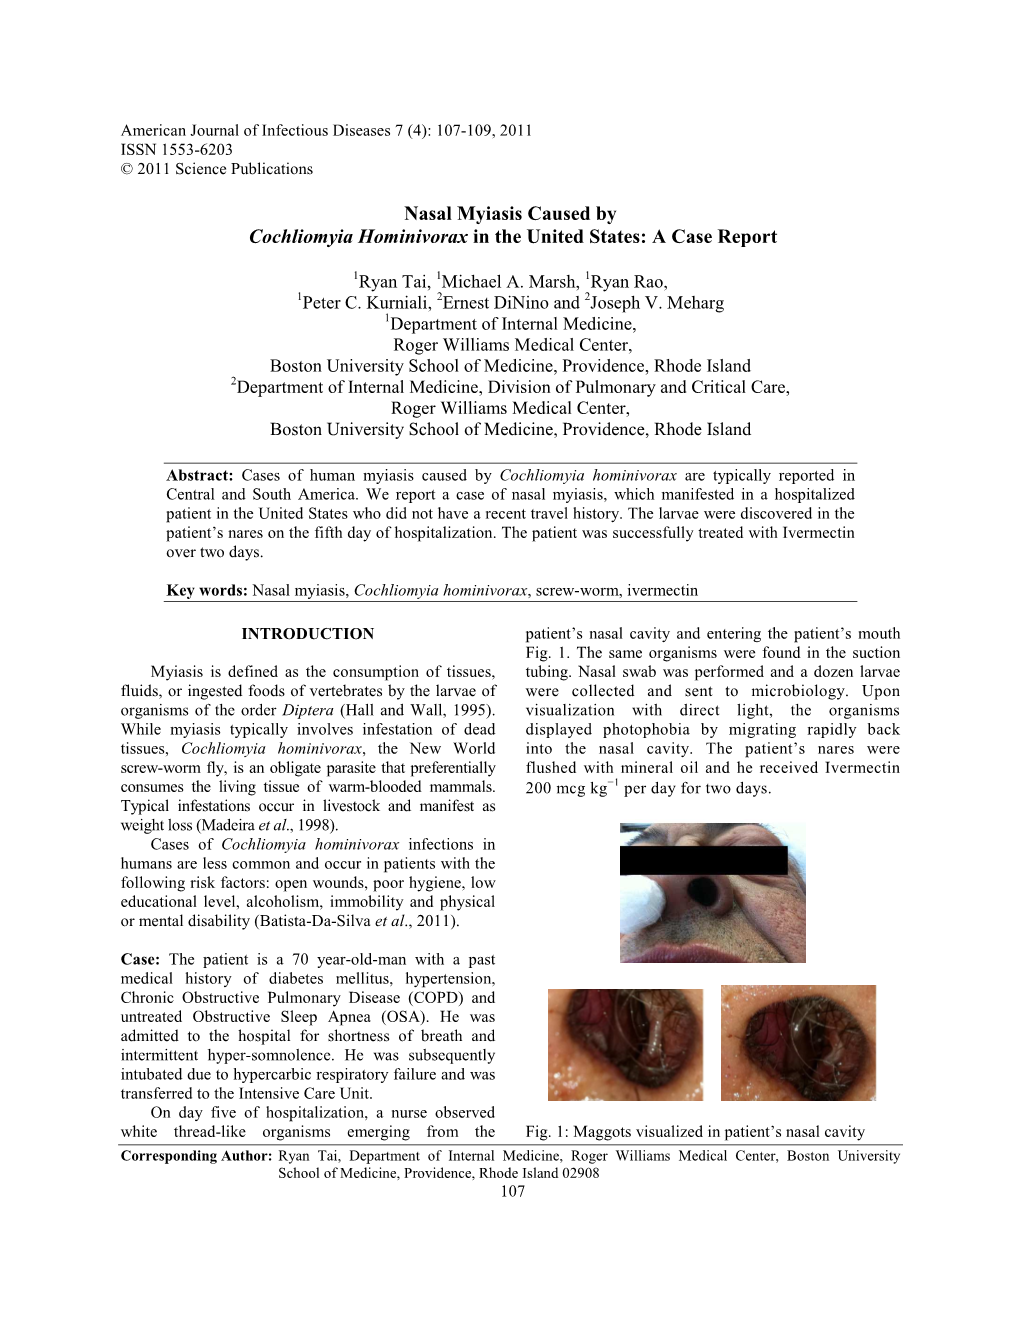 Nasal Myiasis Caused by Cochliomyia Hominivorax in the United States: a Case Report